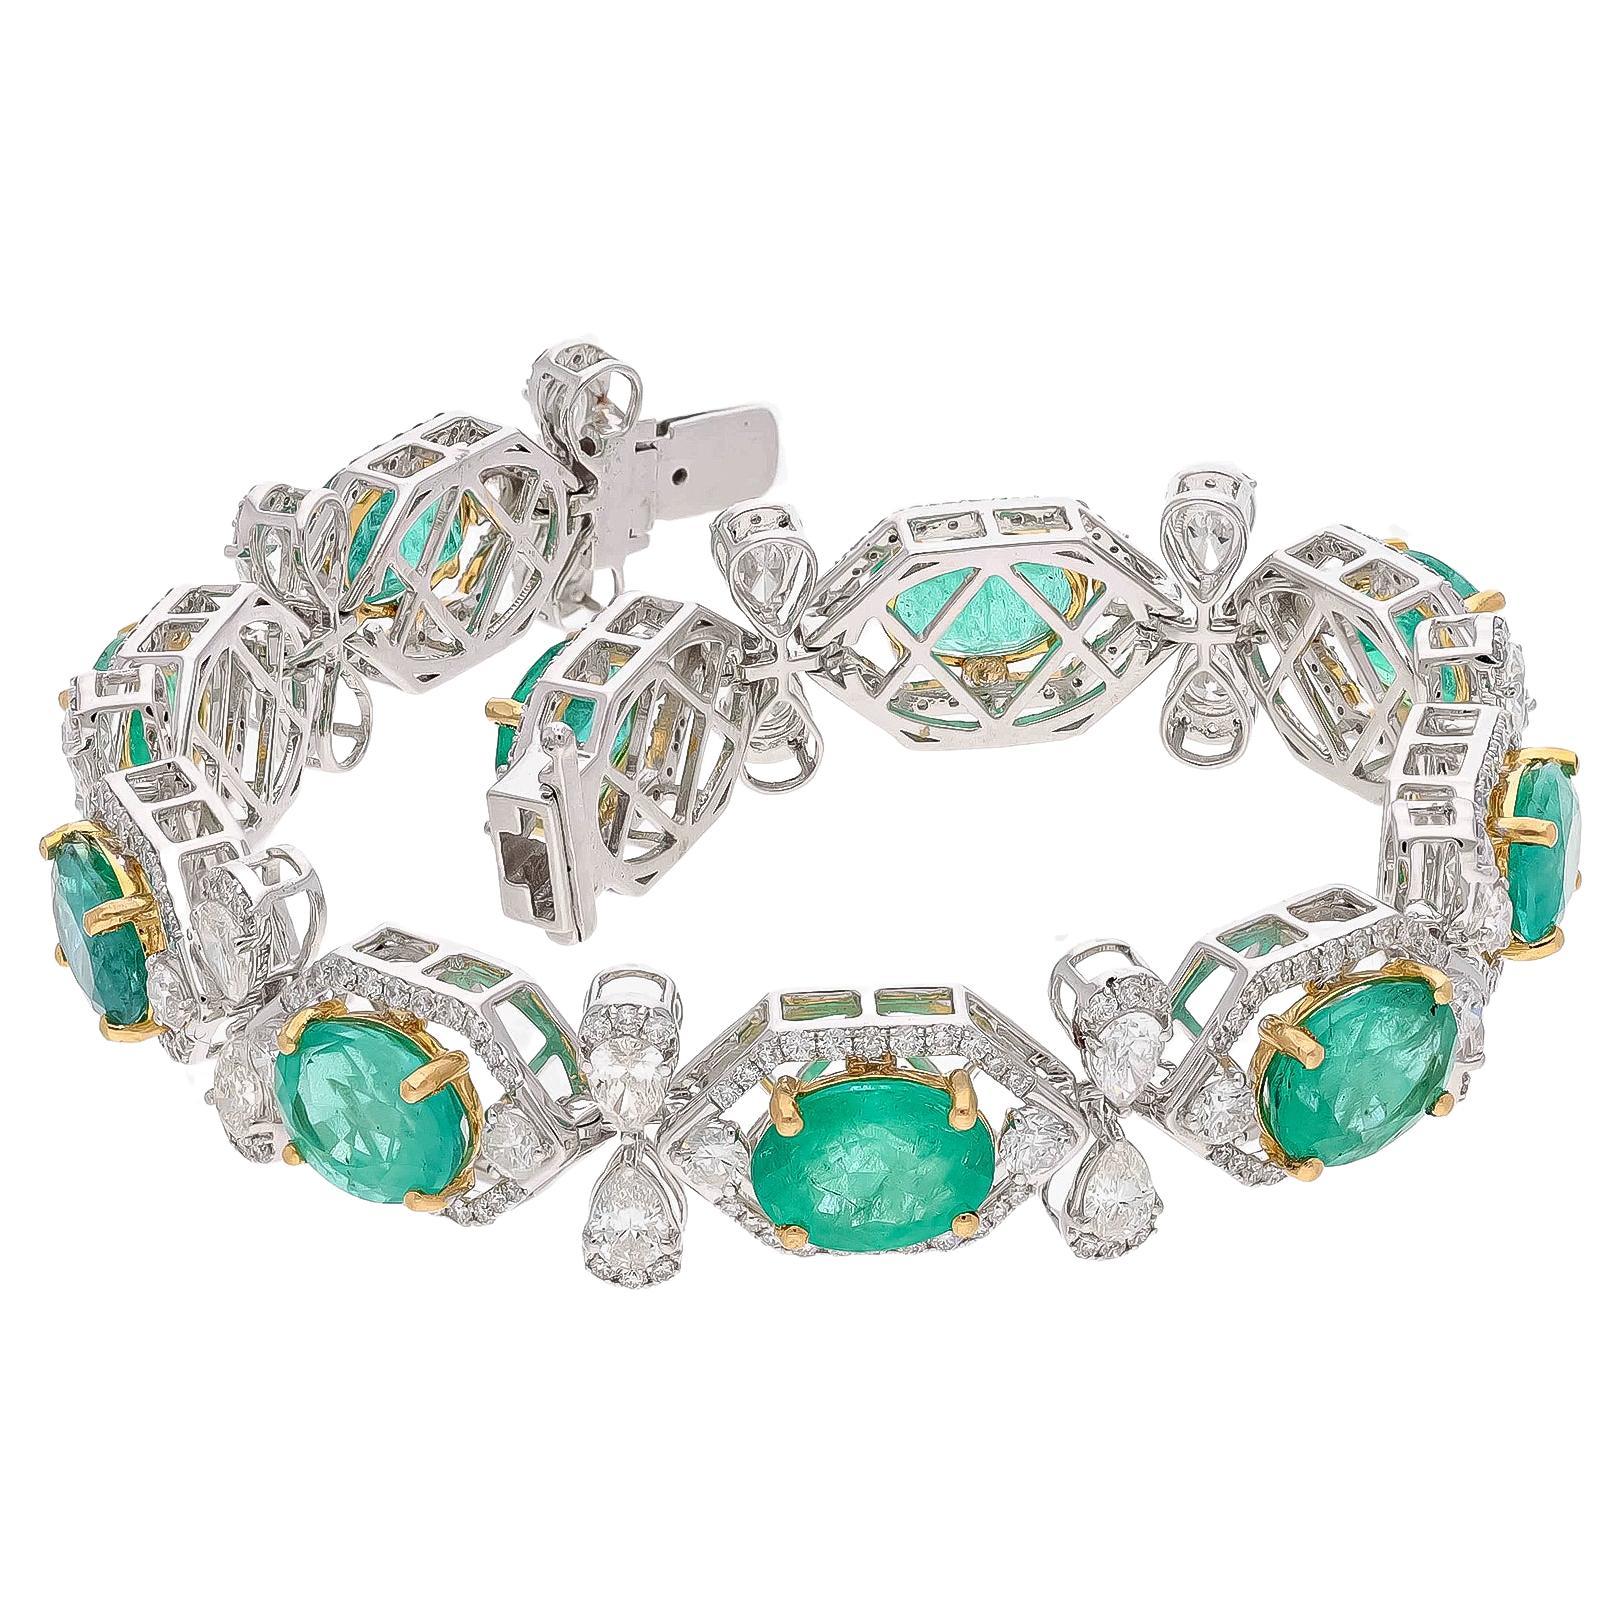 This is a stunning natural Zambian Emerald bracelet which has Emerald of very high quality and diamonds of very good quality . it has vsi clarity and G colour.

Emerald : 17.59 cts

diamonds : 6.03 cts ( good size pear shape and rounds )

gold :